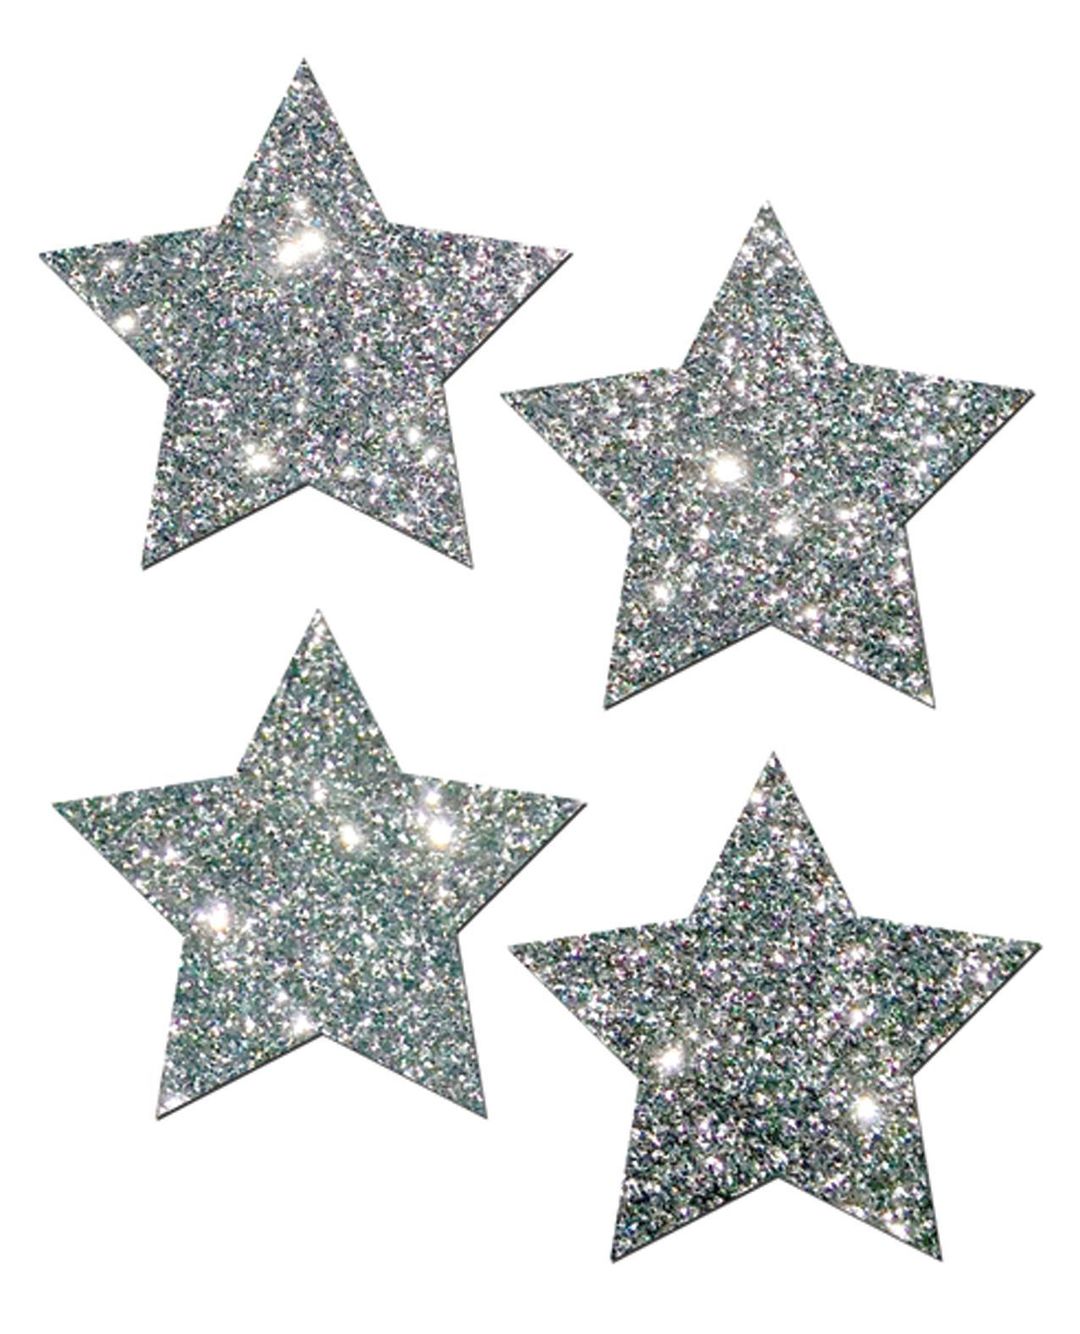 Pastease Petites Glitter Star Silver Pack of 4